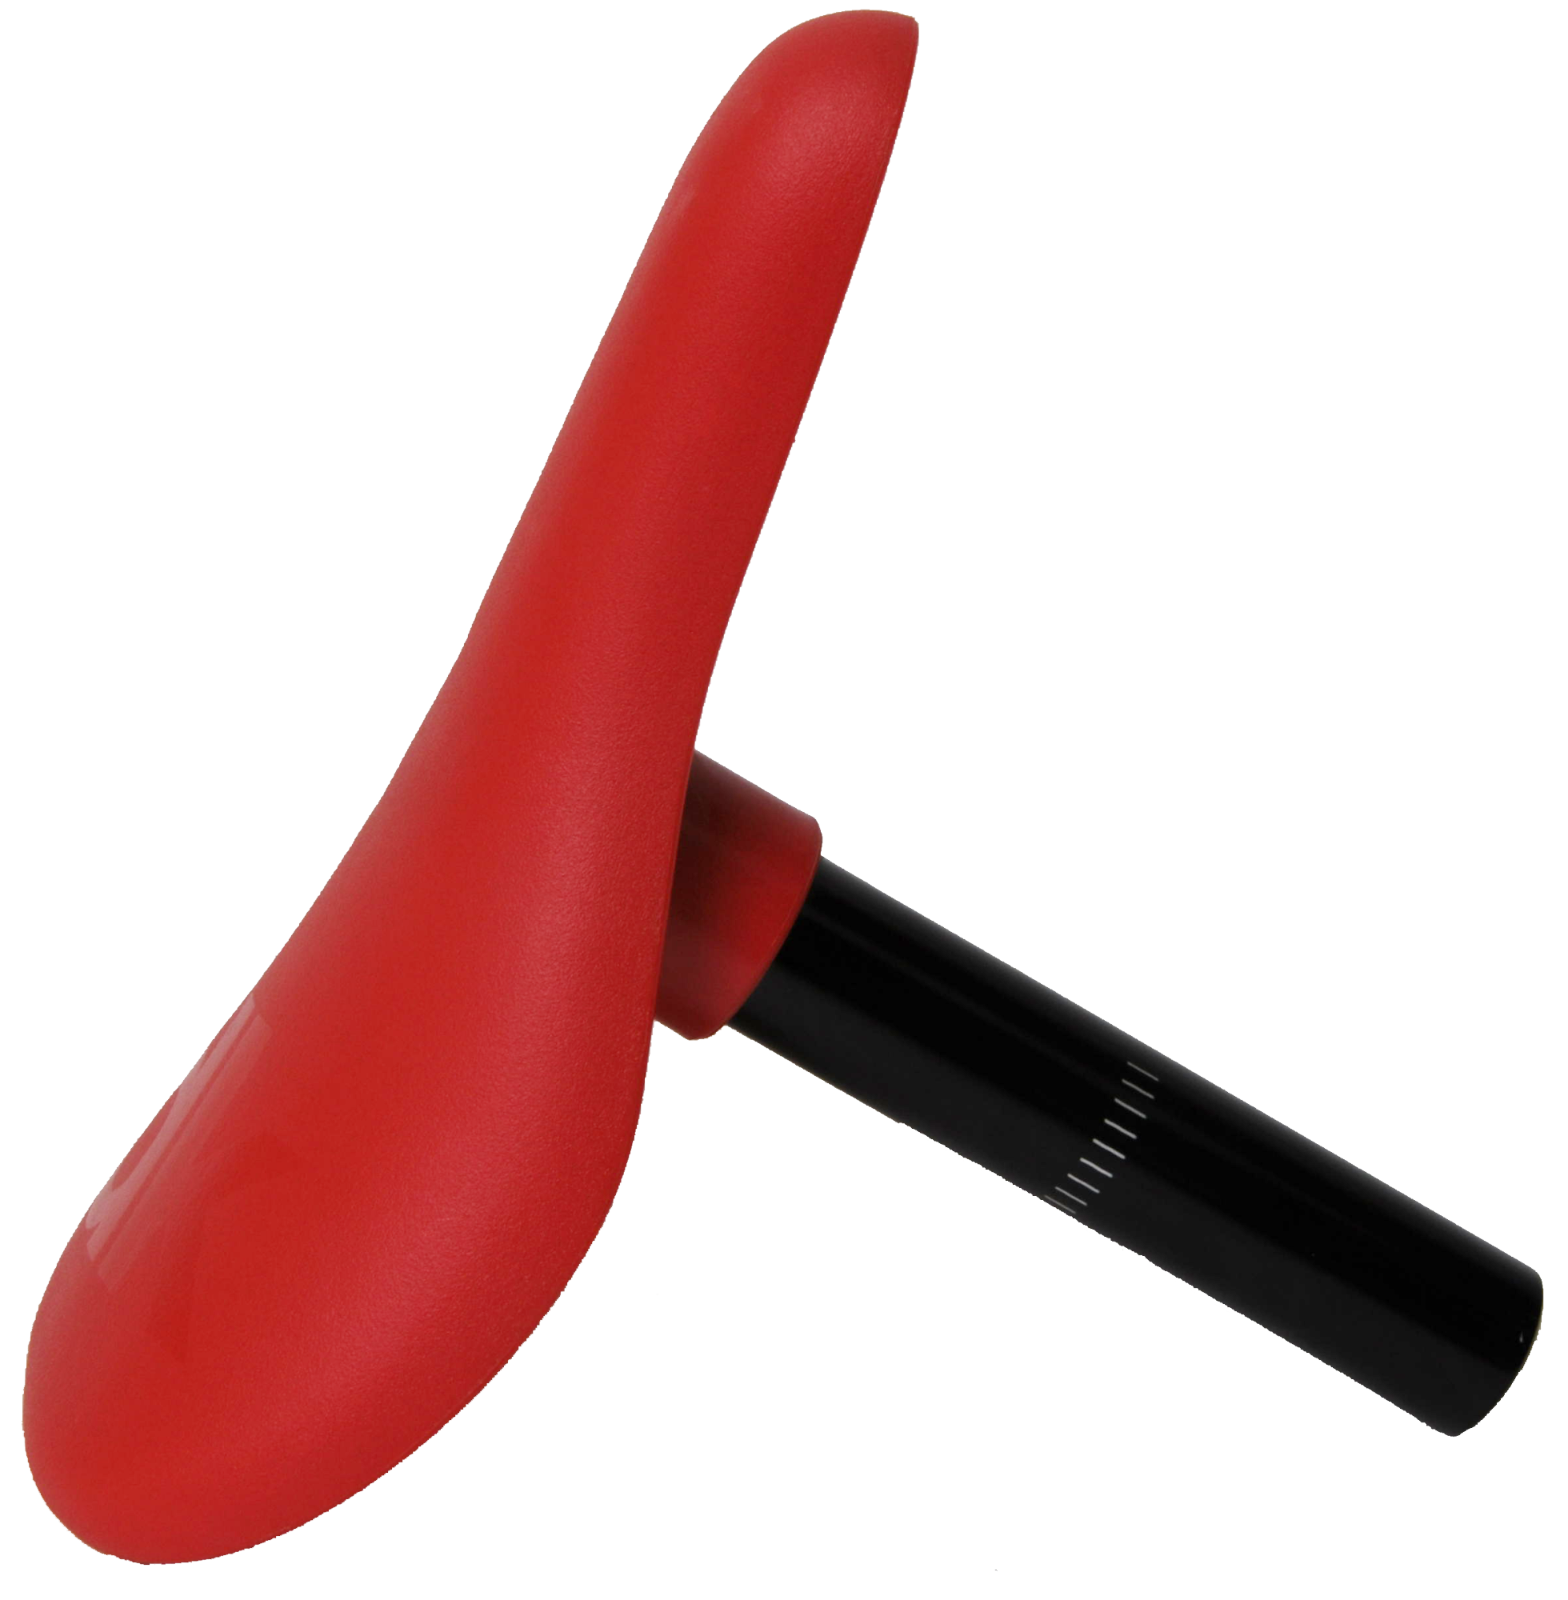 DK Conductor Two Piece BMX Saddle With 25.4mm (1") Seatpost - Choose Colour - Sportandleisure.com (6968045797530)